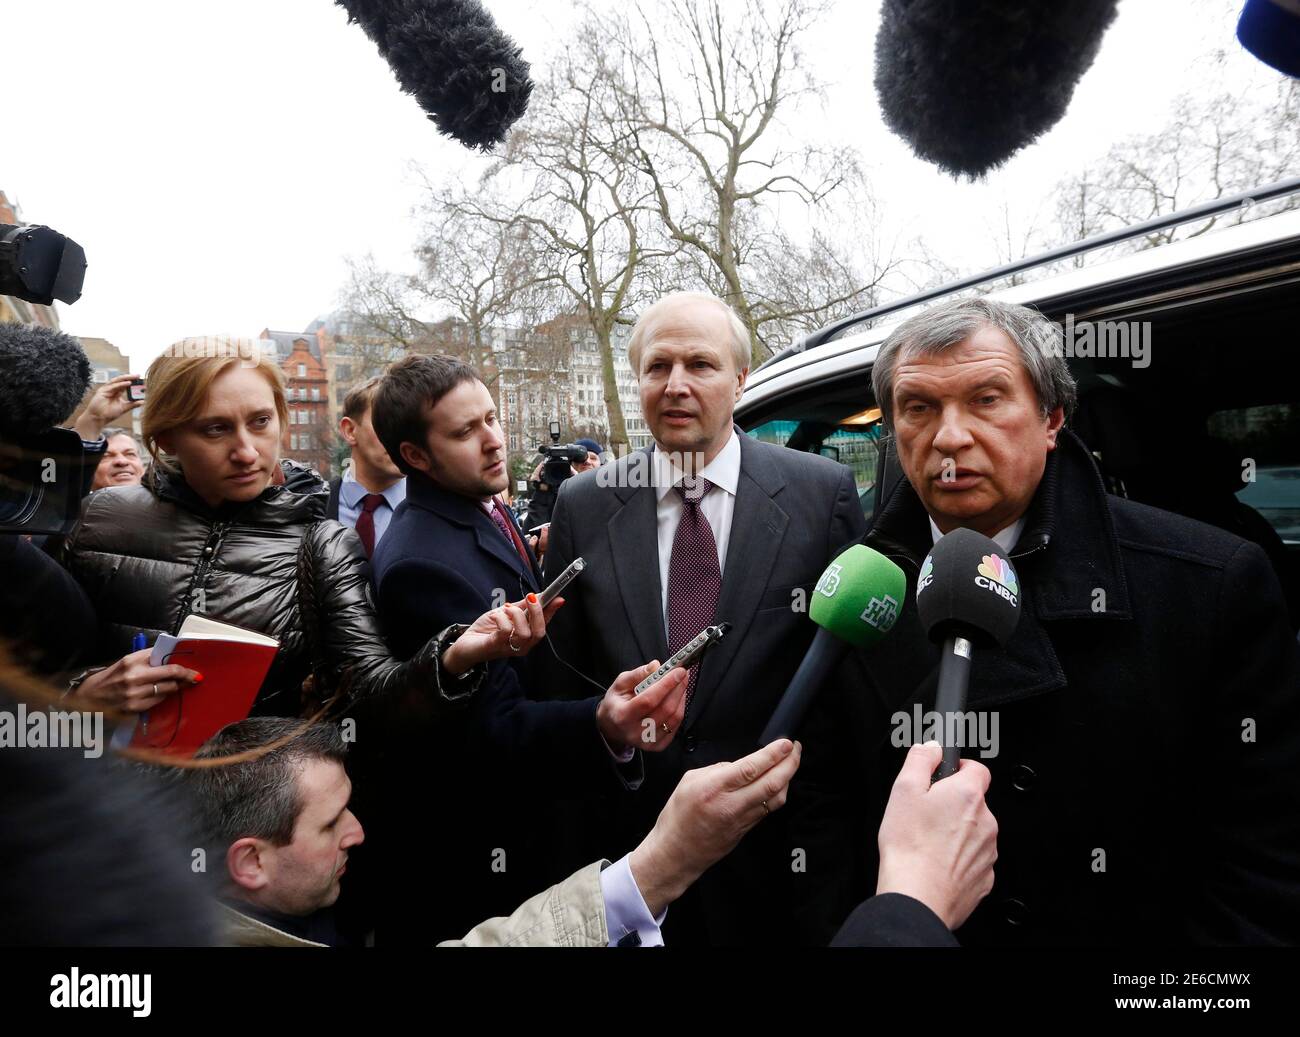 British Petroleum CEO Bob Dudley (C) and Rosneft CEO Igor Sechin (R) speak to journalists as they arrive outside the BP headquarters in central London March 21, 2013. Russian state oil company Rosneft closed its deal to buy TNK-BP from UK-based BP and four tycoons on Thursday, releasing $40 billion cash to the sellers and becoming a bigger oil producer than Exxon Mobil. The $55 billion deal, which also gives BP a near 20 percent stake in Rosneft, was announced last year after months of on-off negotiations. It is the biggest in Russia's corporate history.. REUTERS/Olivia Harris (BRITAIN - Tags: Stock Photo